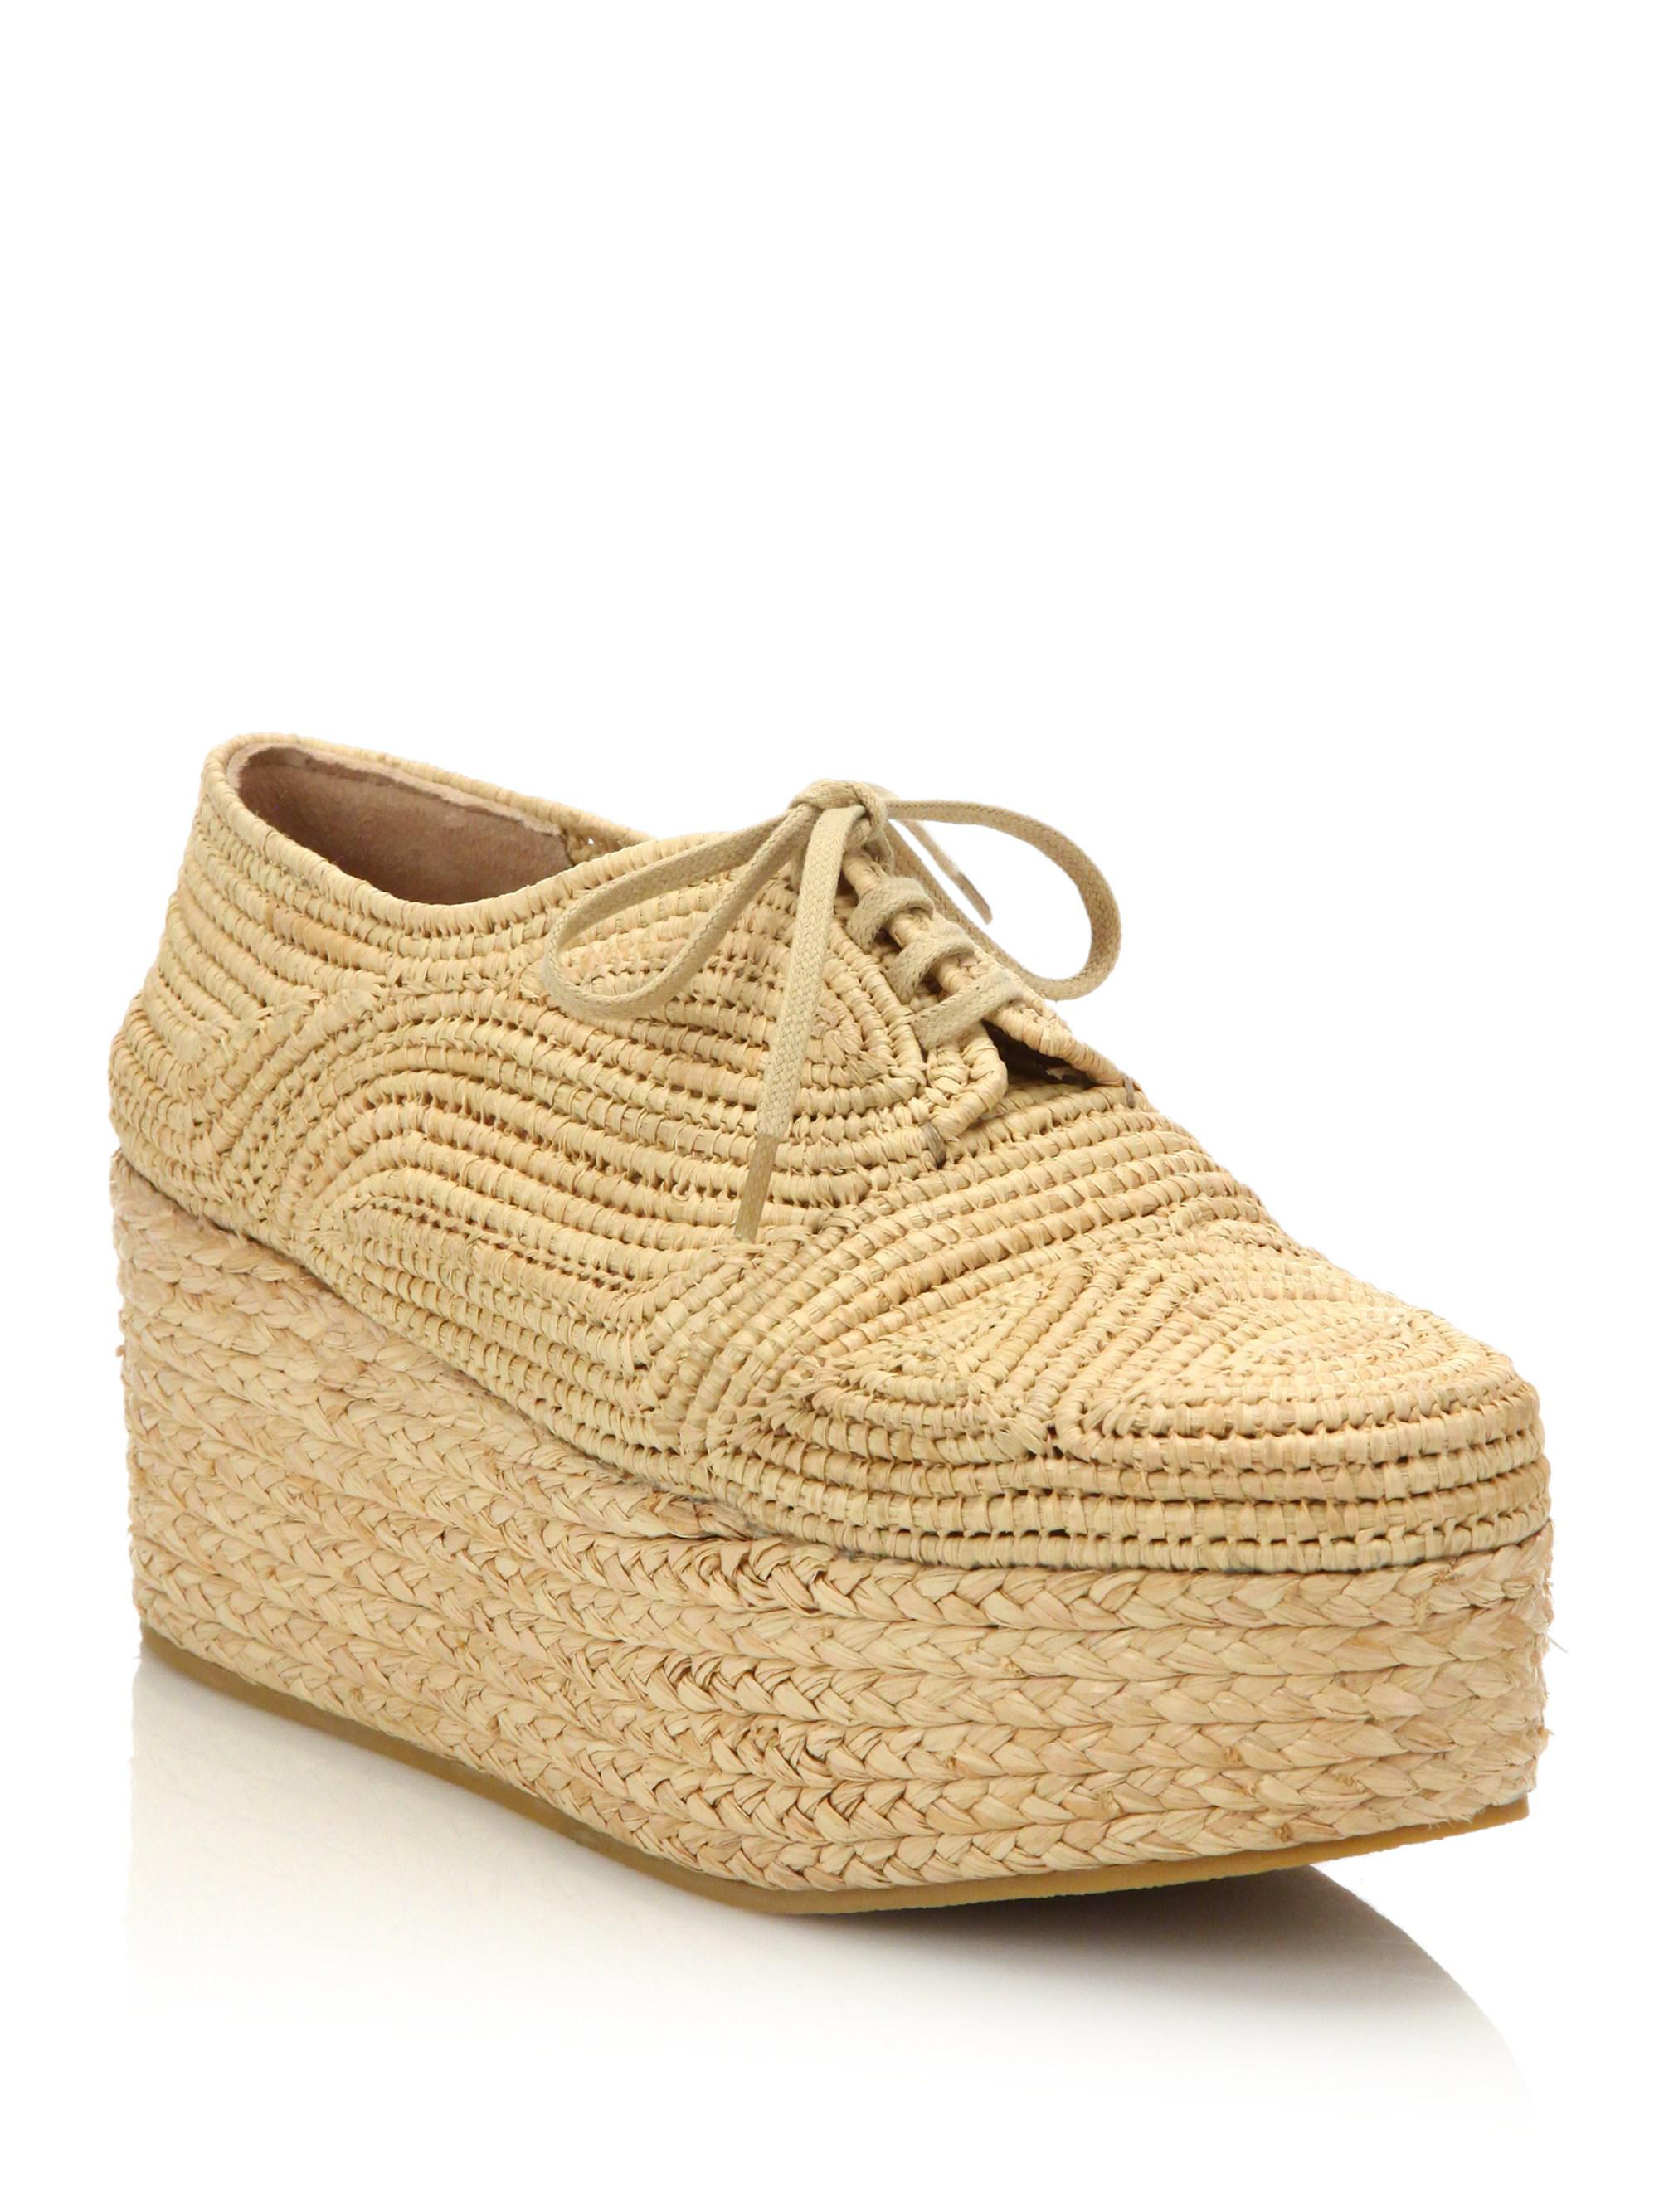 Robert Clergerie Leather Pinto Raffia Espadrille Platform Sneakers in  Natural | Lyst